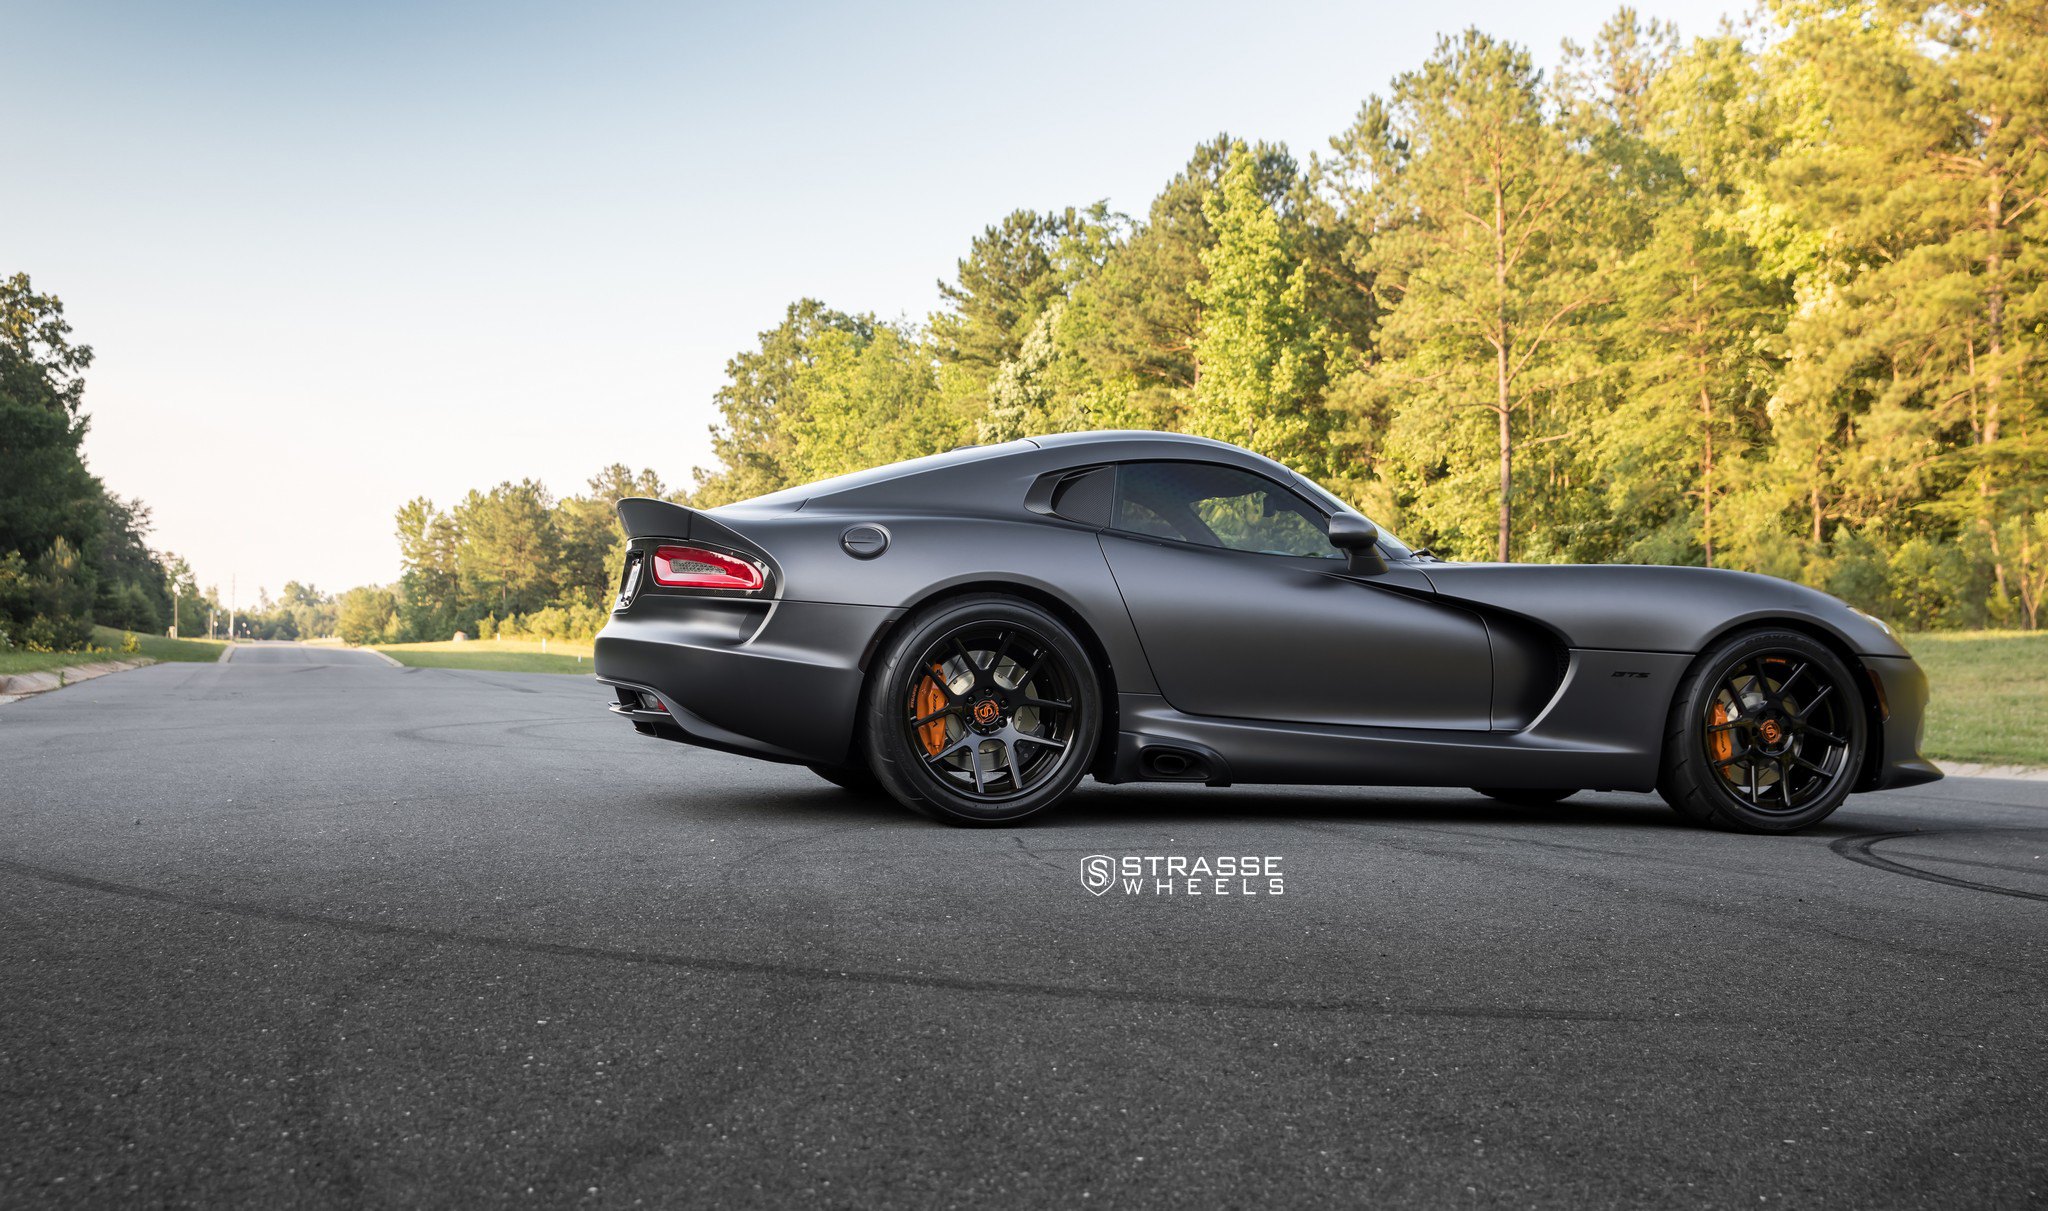 Gloss Black Strasse Rims on Gray Dodge Viper - Photo by Strasse Forged